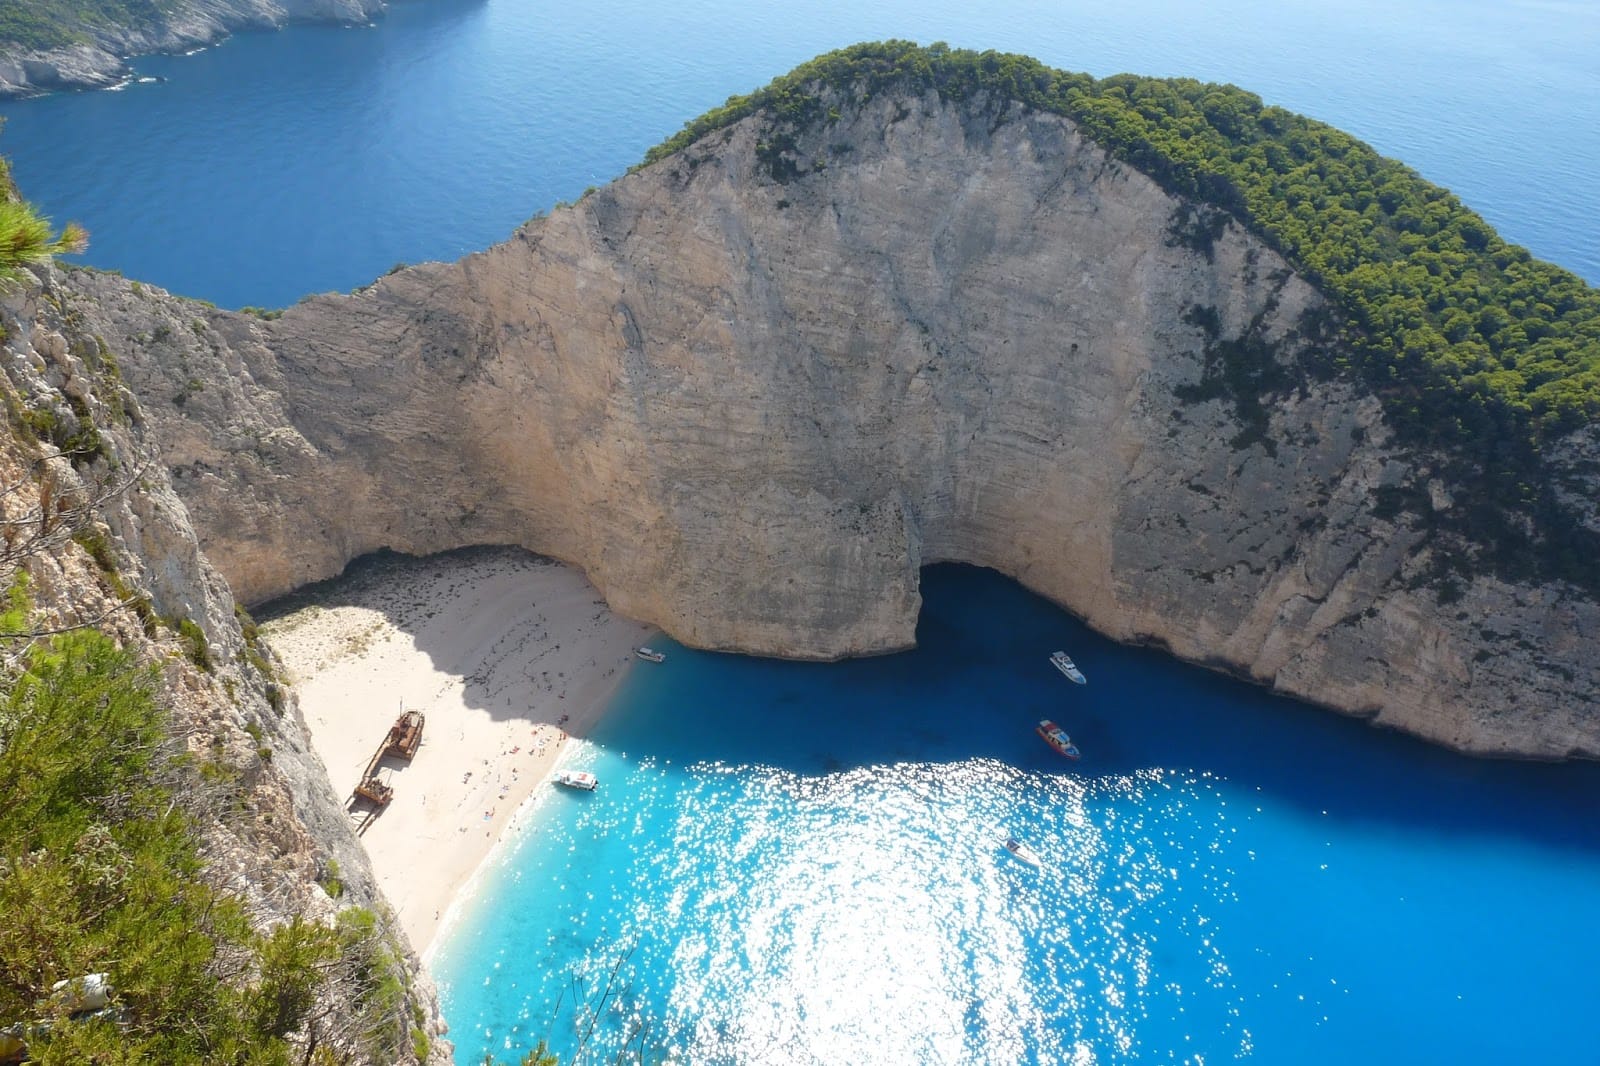 Europe is home to some of the world's most spectacular beaches. (Handout photo)